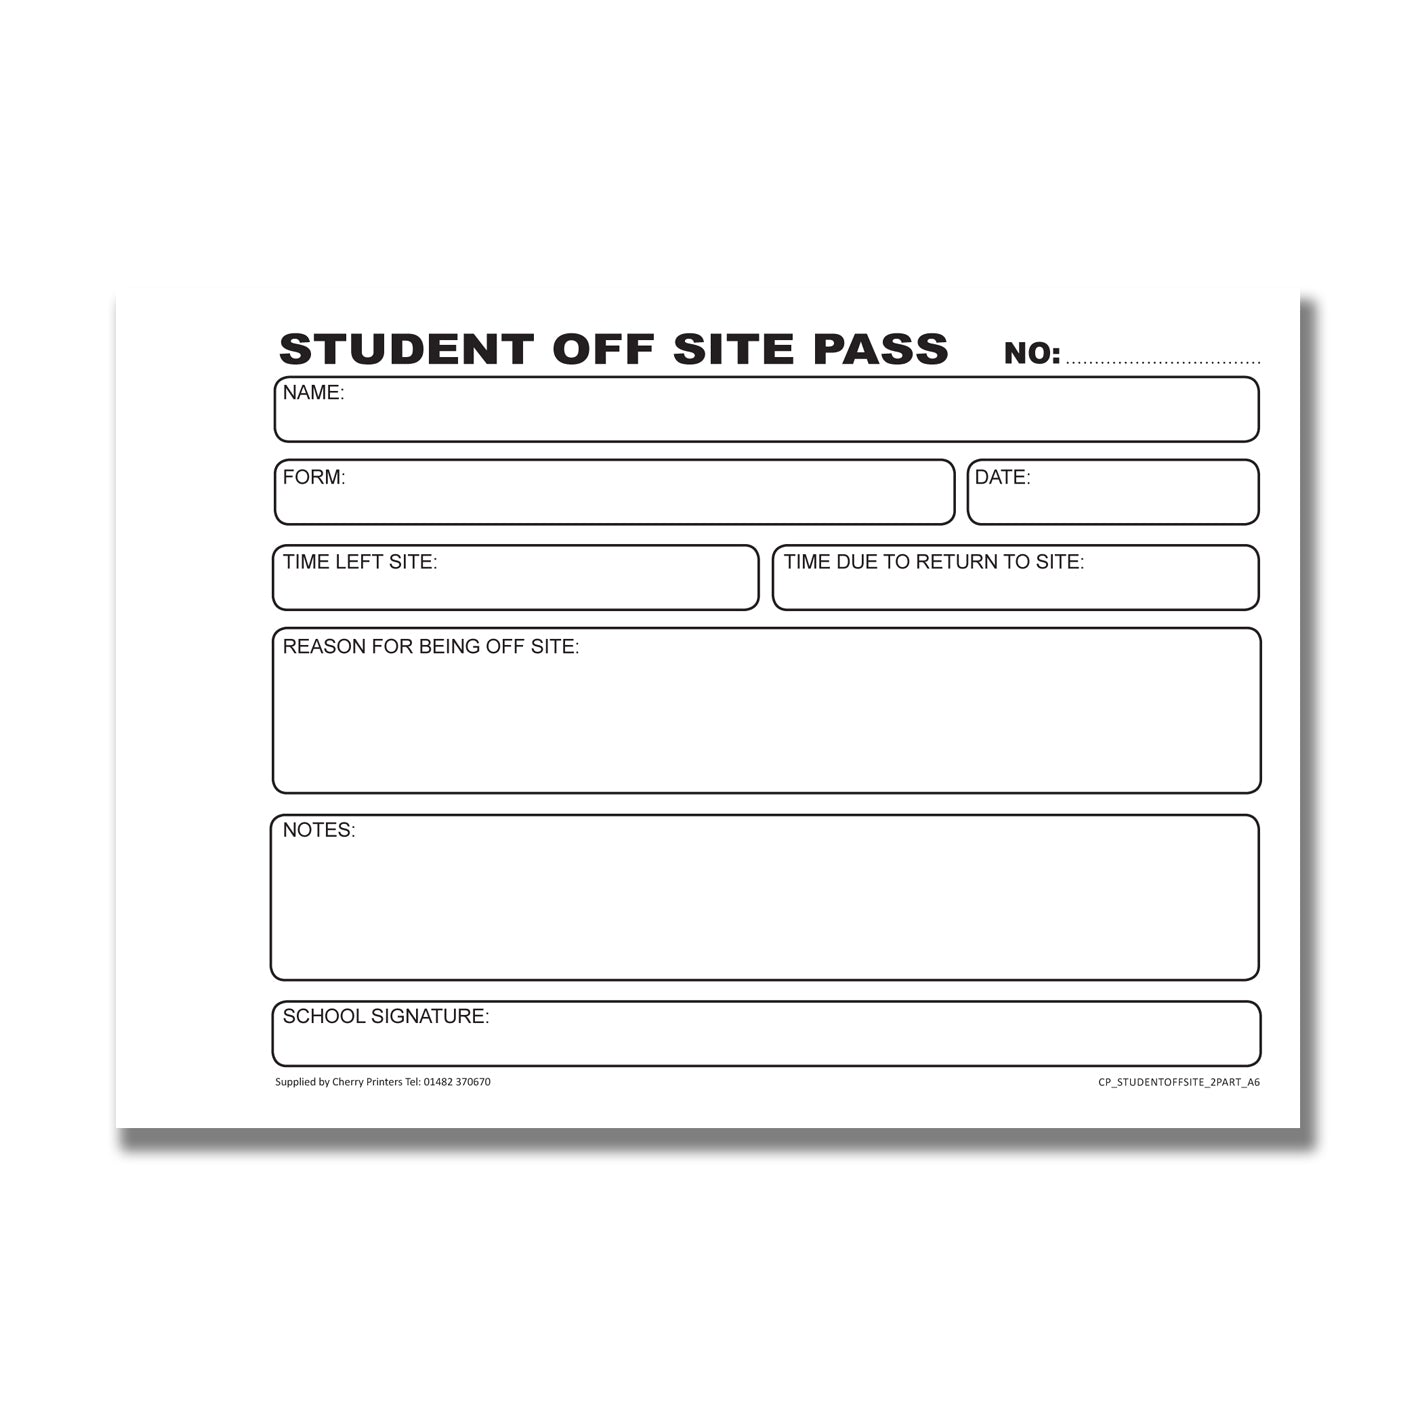 NCR Student Off Site Pass Duplicate Book A6